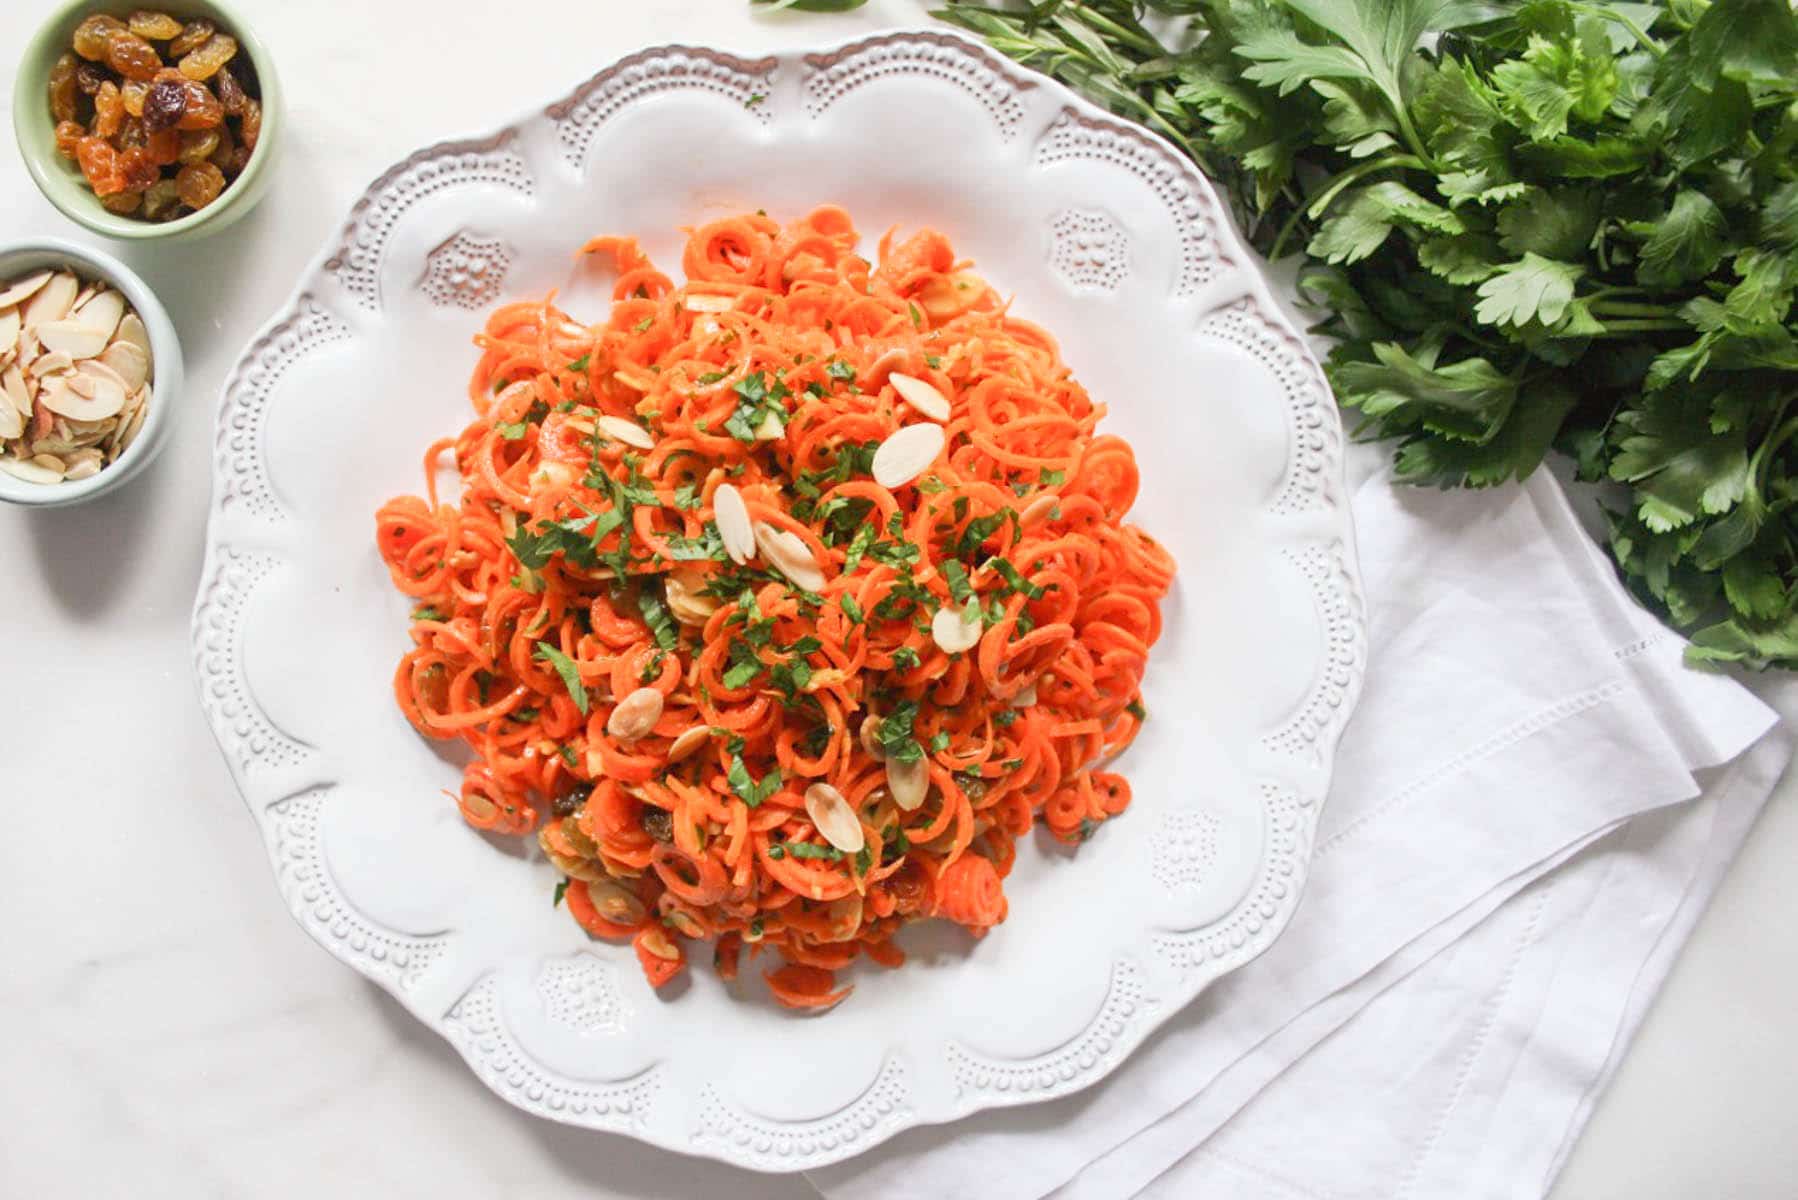 Spiralized-Carrot-Salad-with-Herbs-and-Toasted-Almonds-2